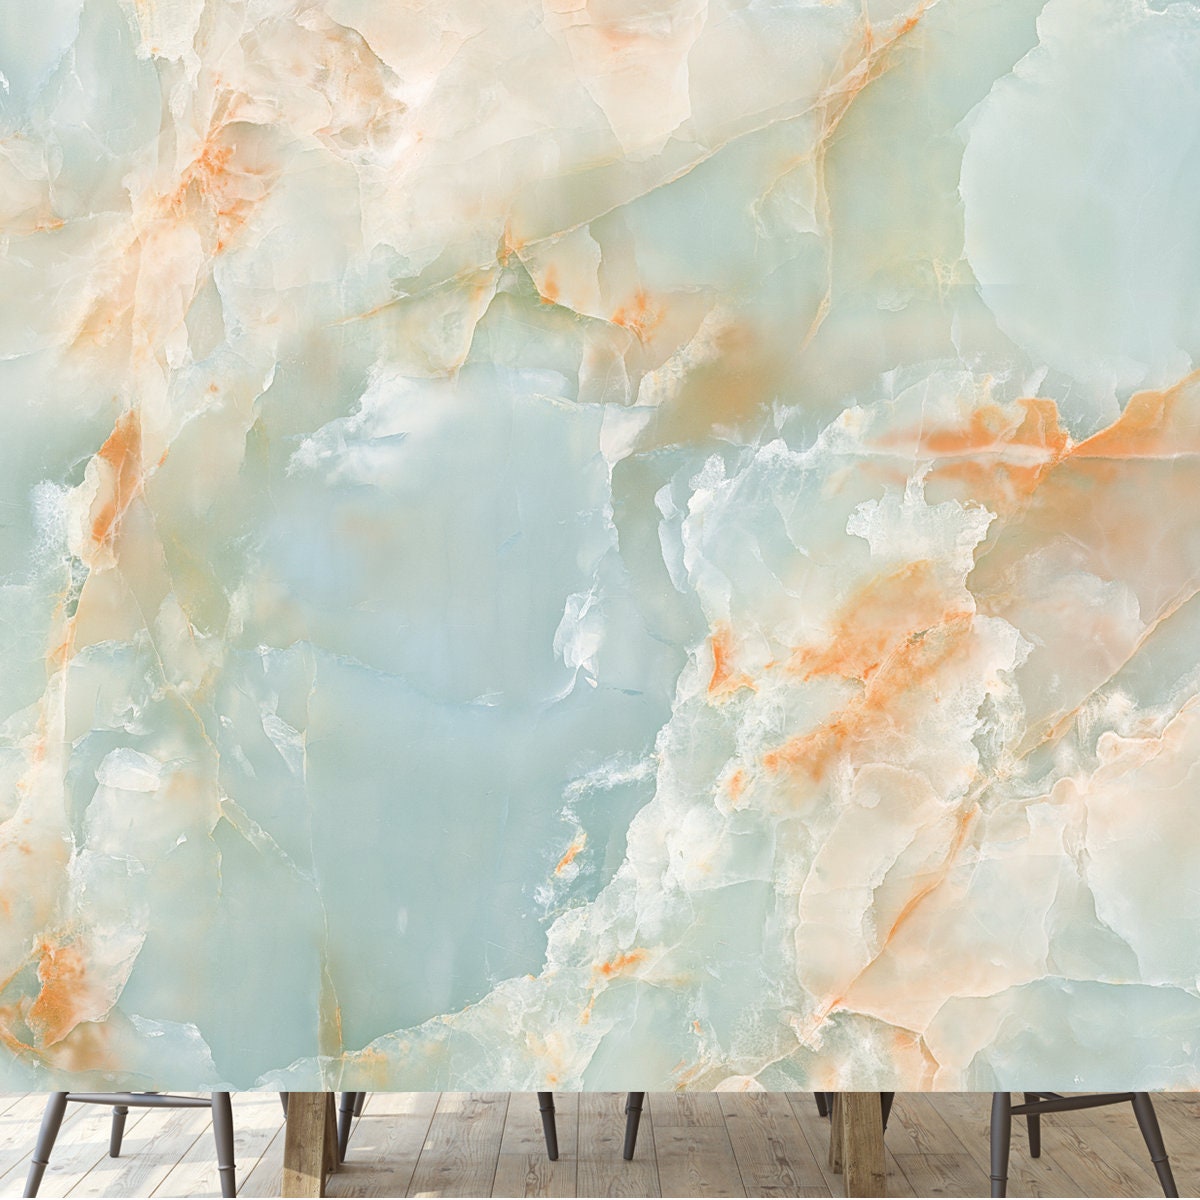 Onyx Marble Texture Background, High Resolution Aqua Colored Onyx Marble Wallpaper Dining Room Mural